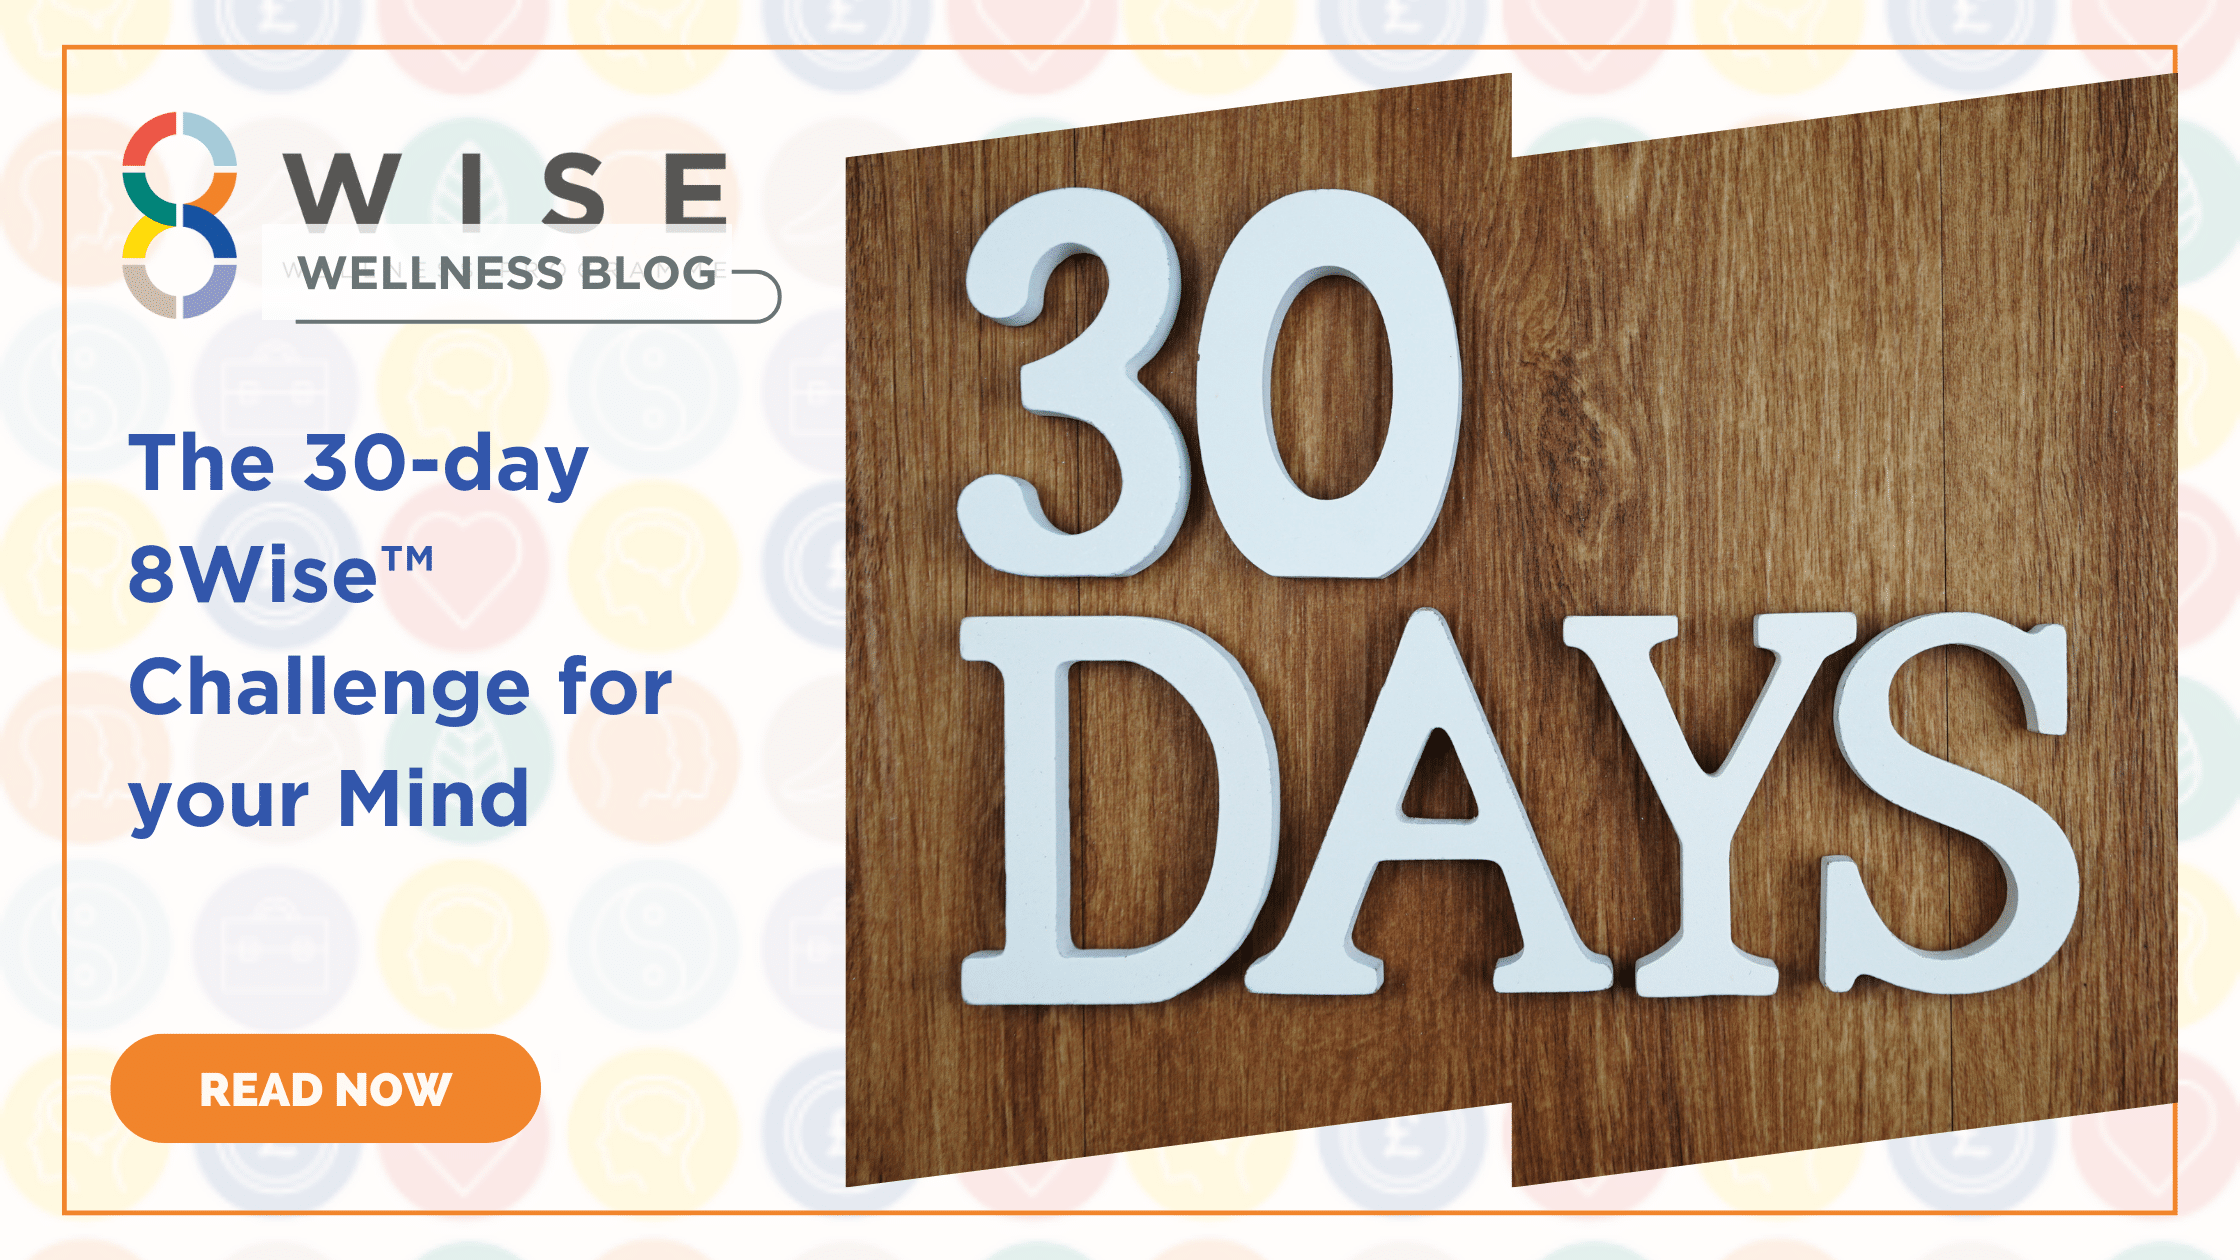 The 30-day 8Wise™ Challenge for your Mind